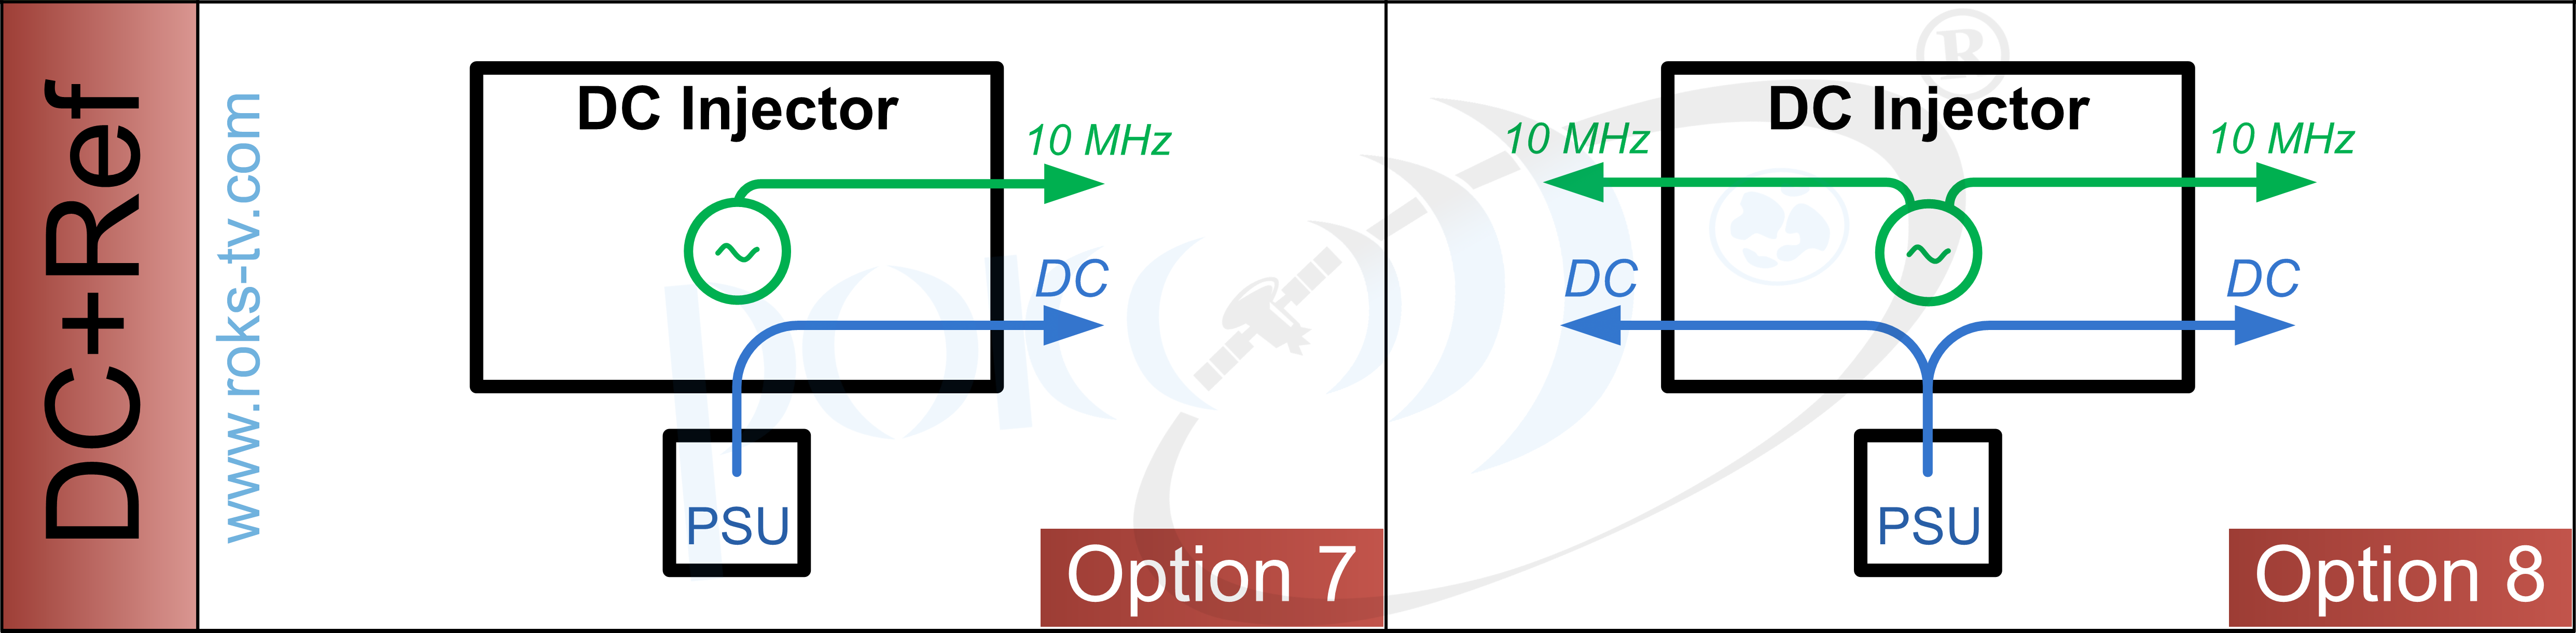 DC injector with DC pass and Reference